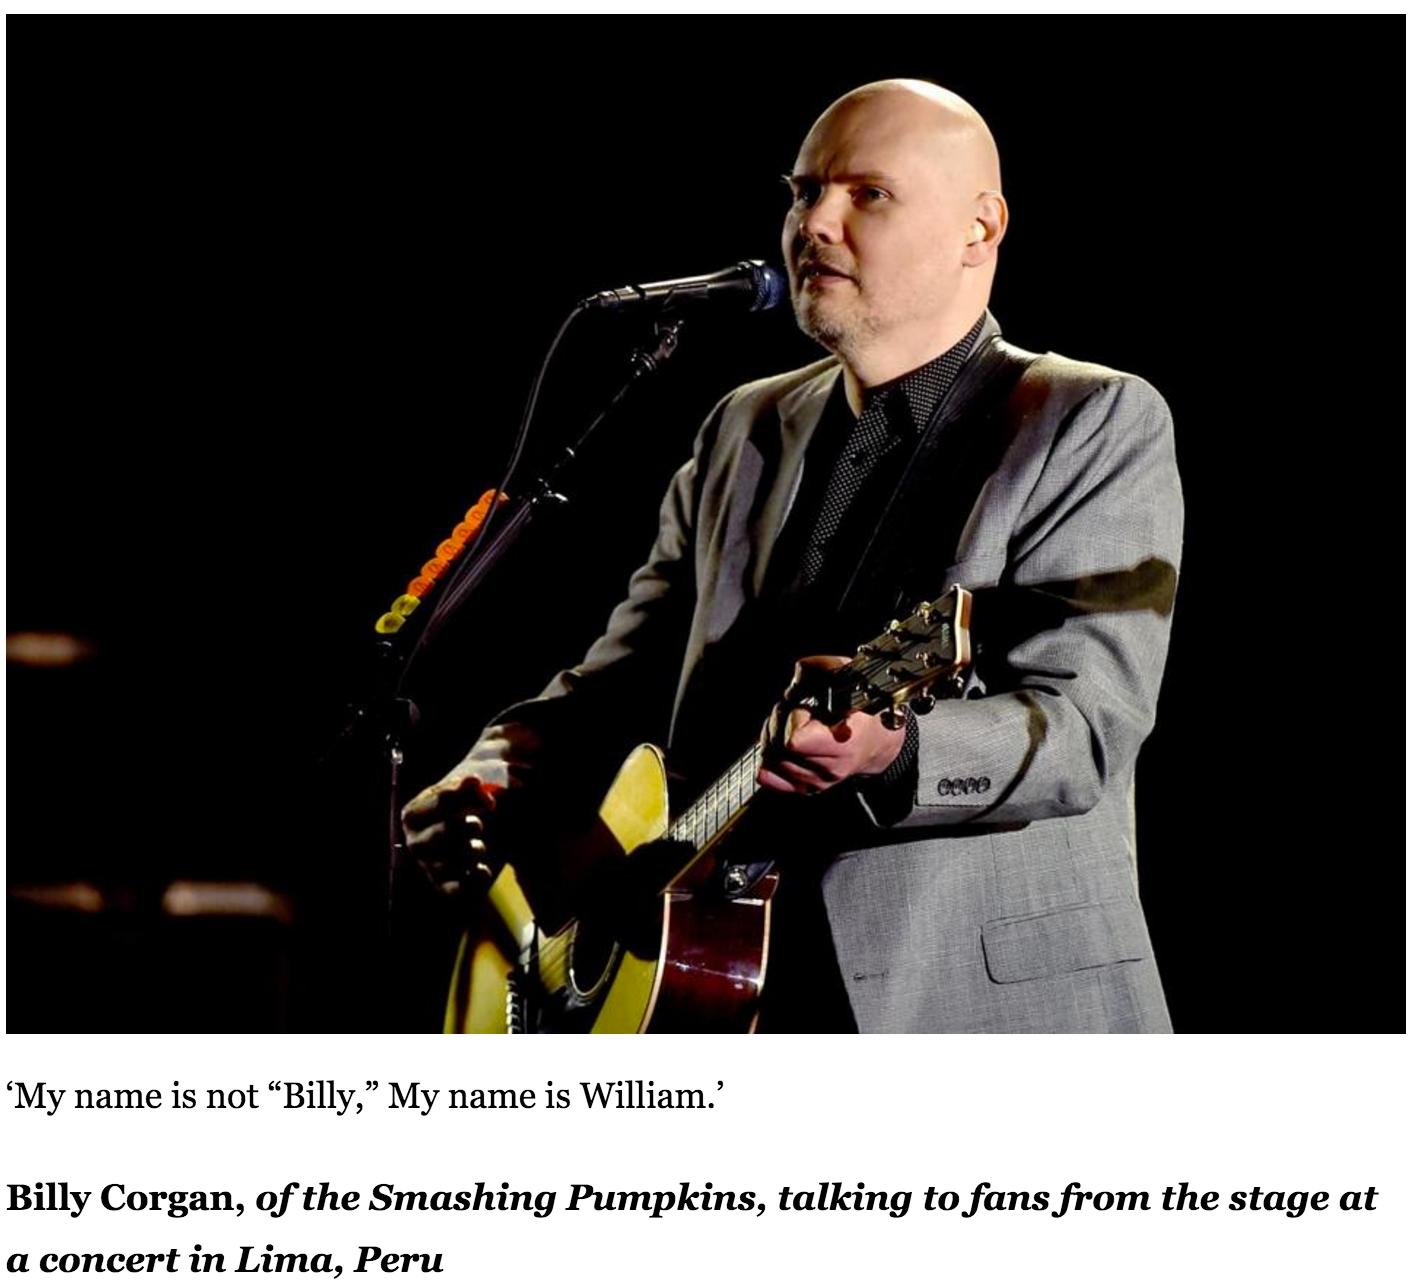 billy corgan and taylor swift - My name is not Billy," My name is William.' Billy Corgan, of the Smashing Pumpkins, talking to fans from the stage at a concert in Lima, Peru